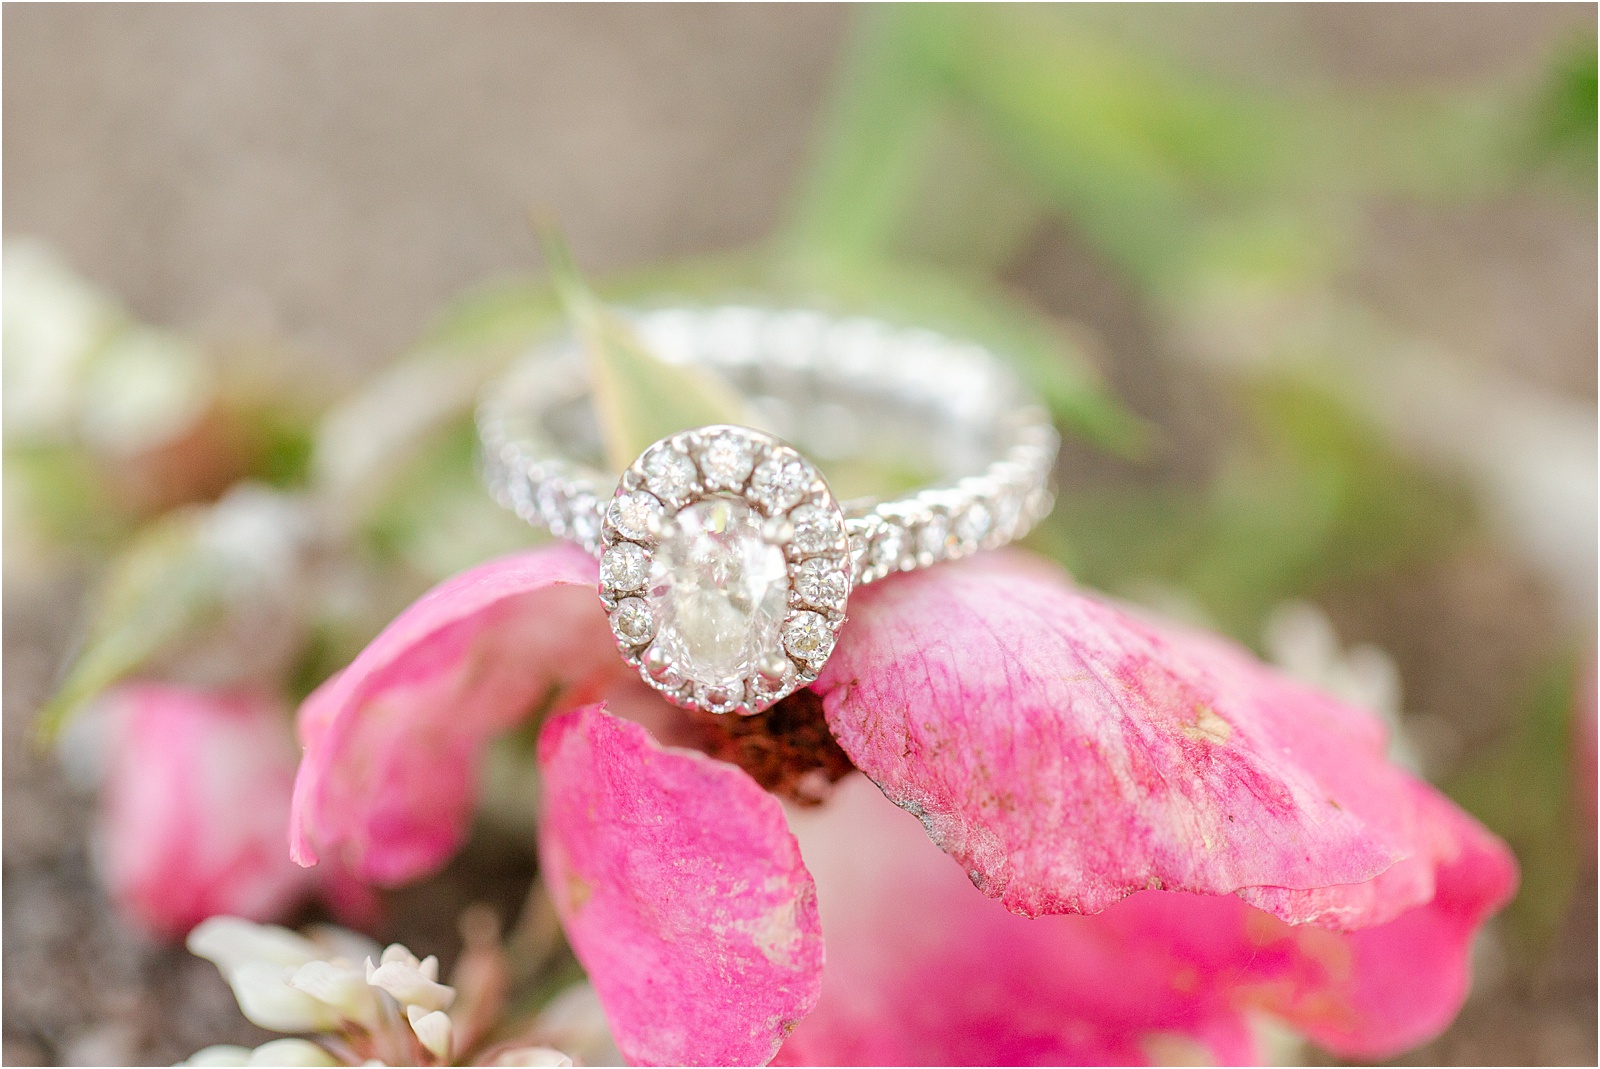 Large diamond white engagement ring on a flower